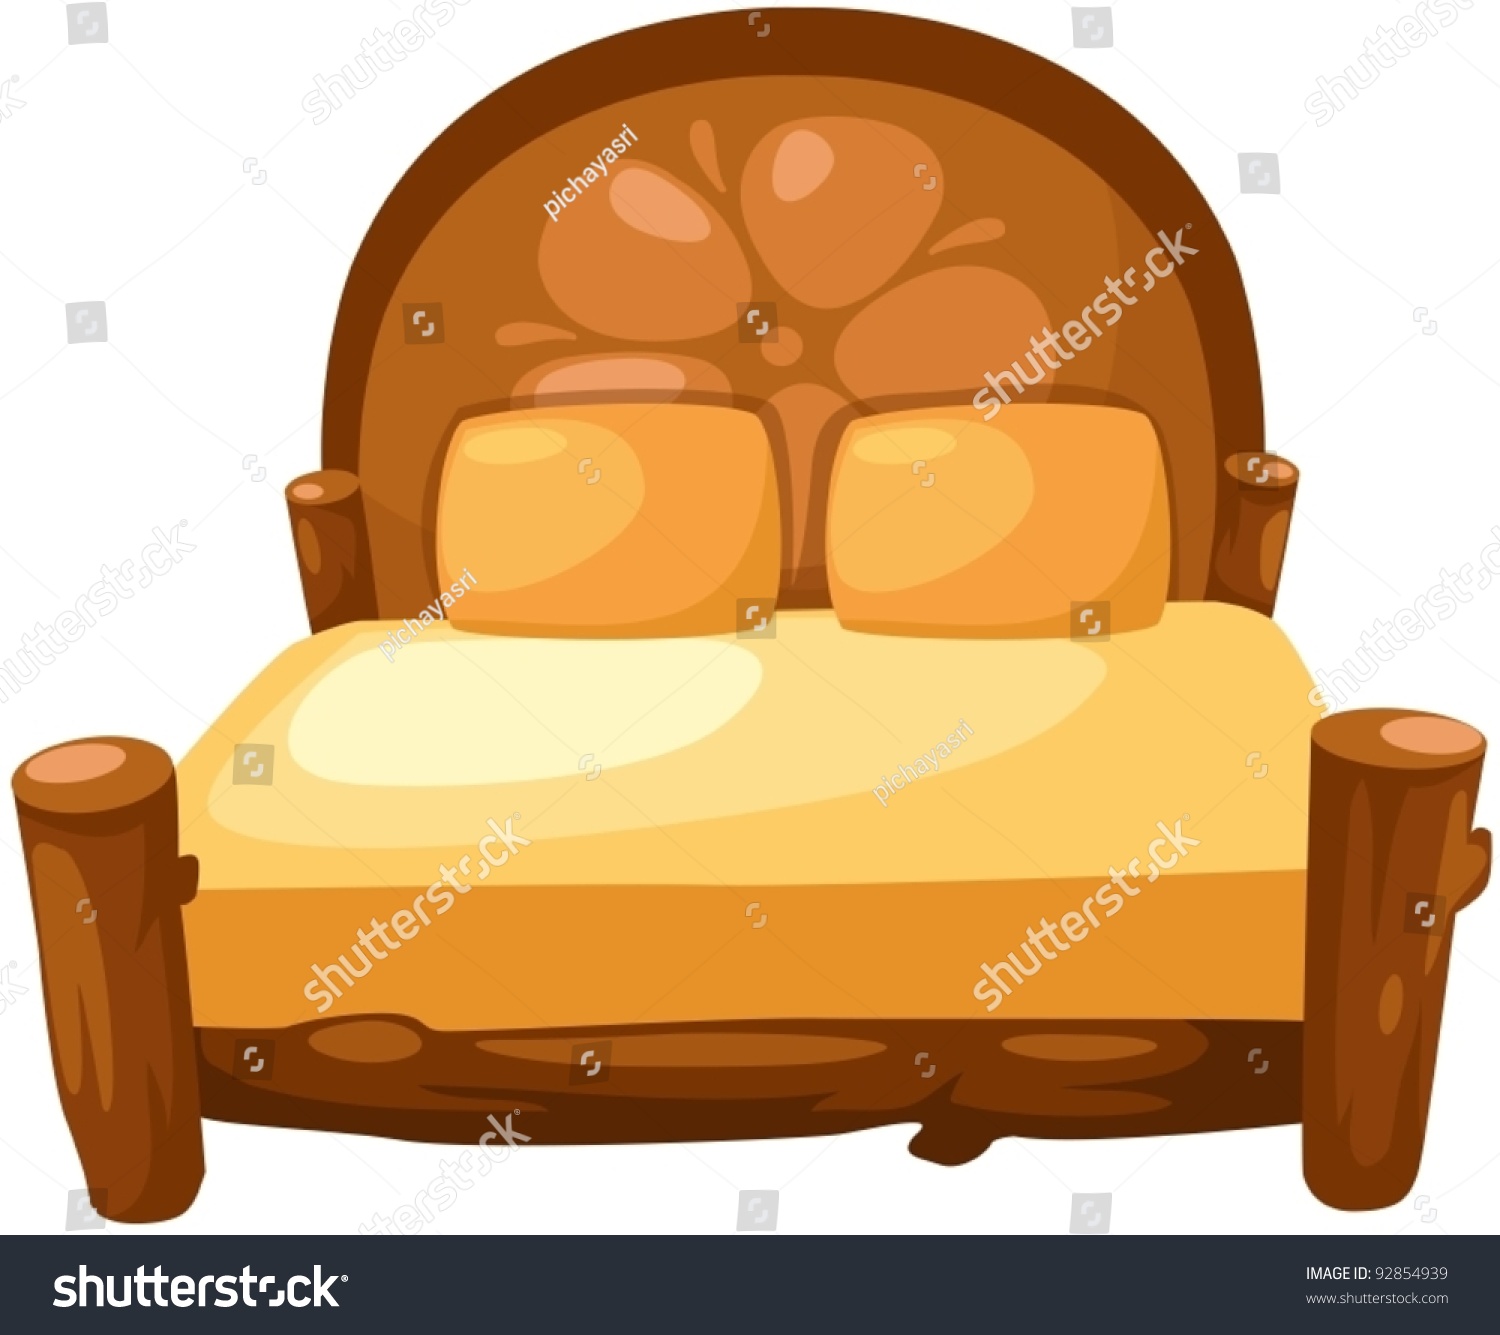 Illustration Of Isolated Children Bed On White Background - 92854939